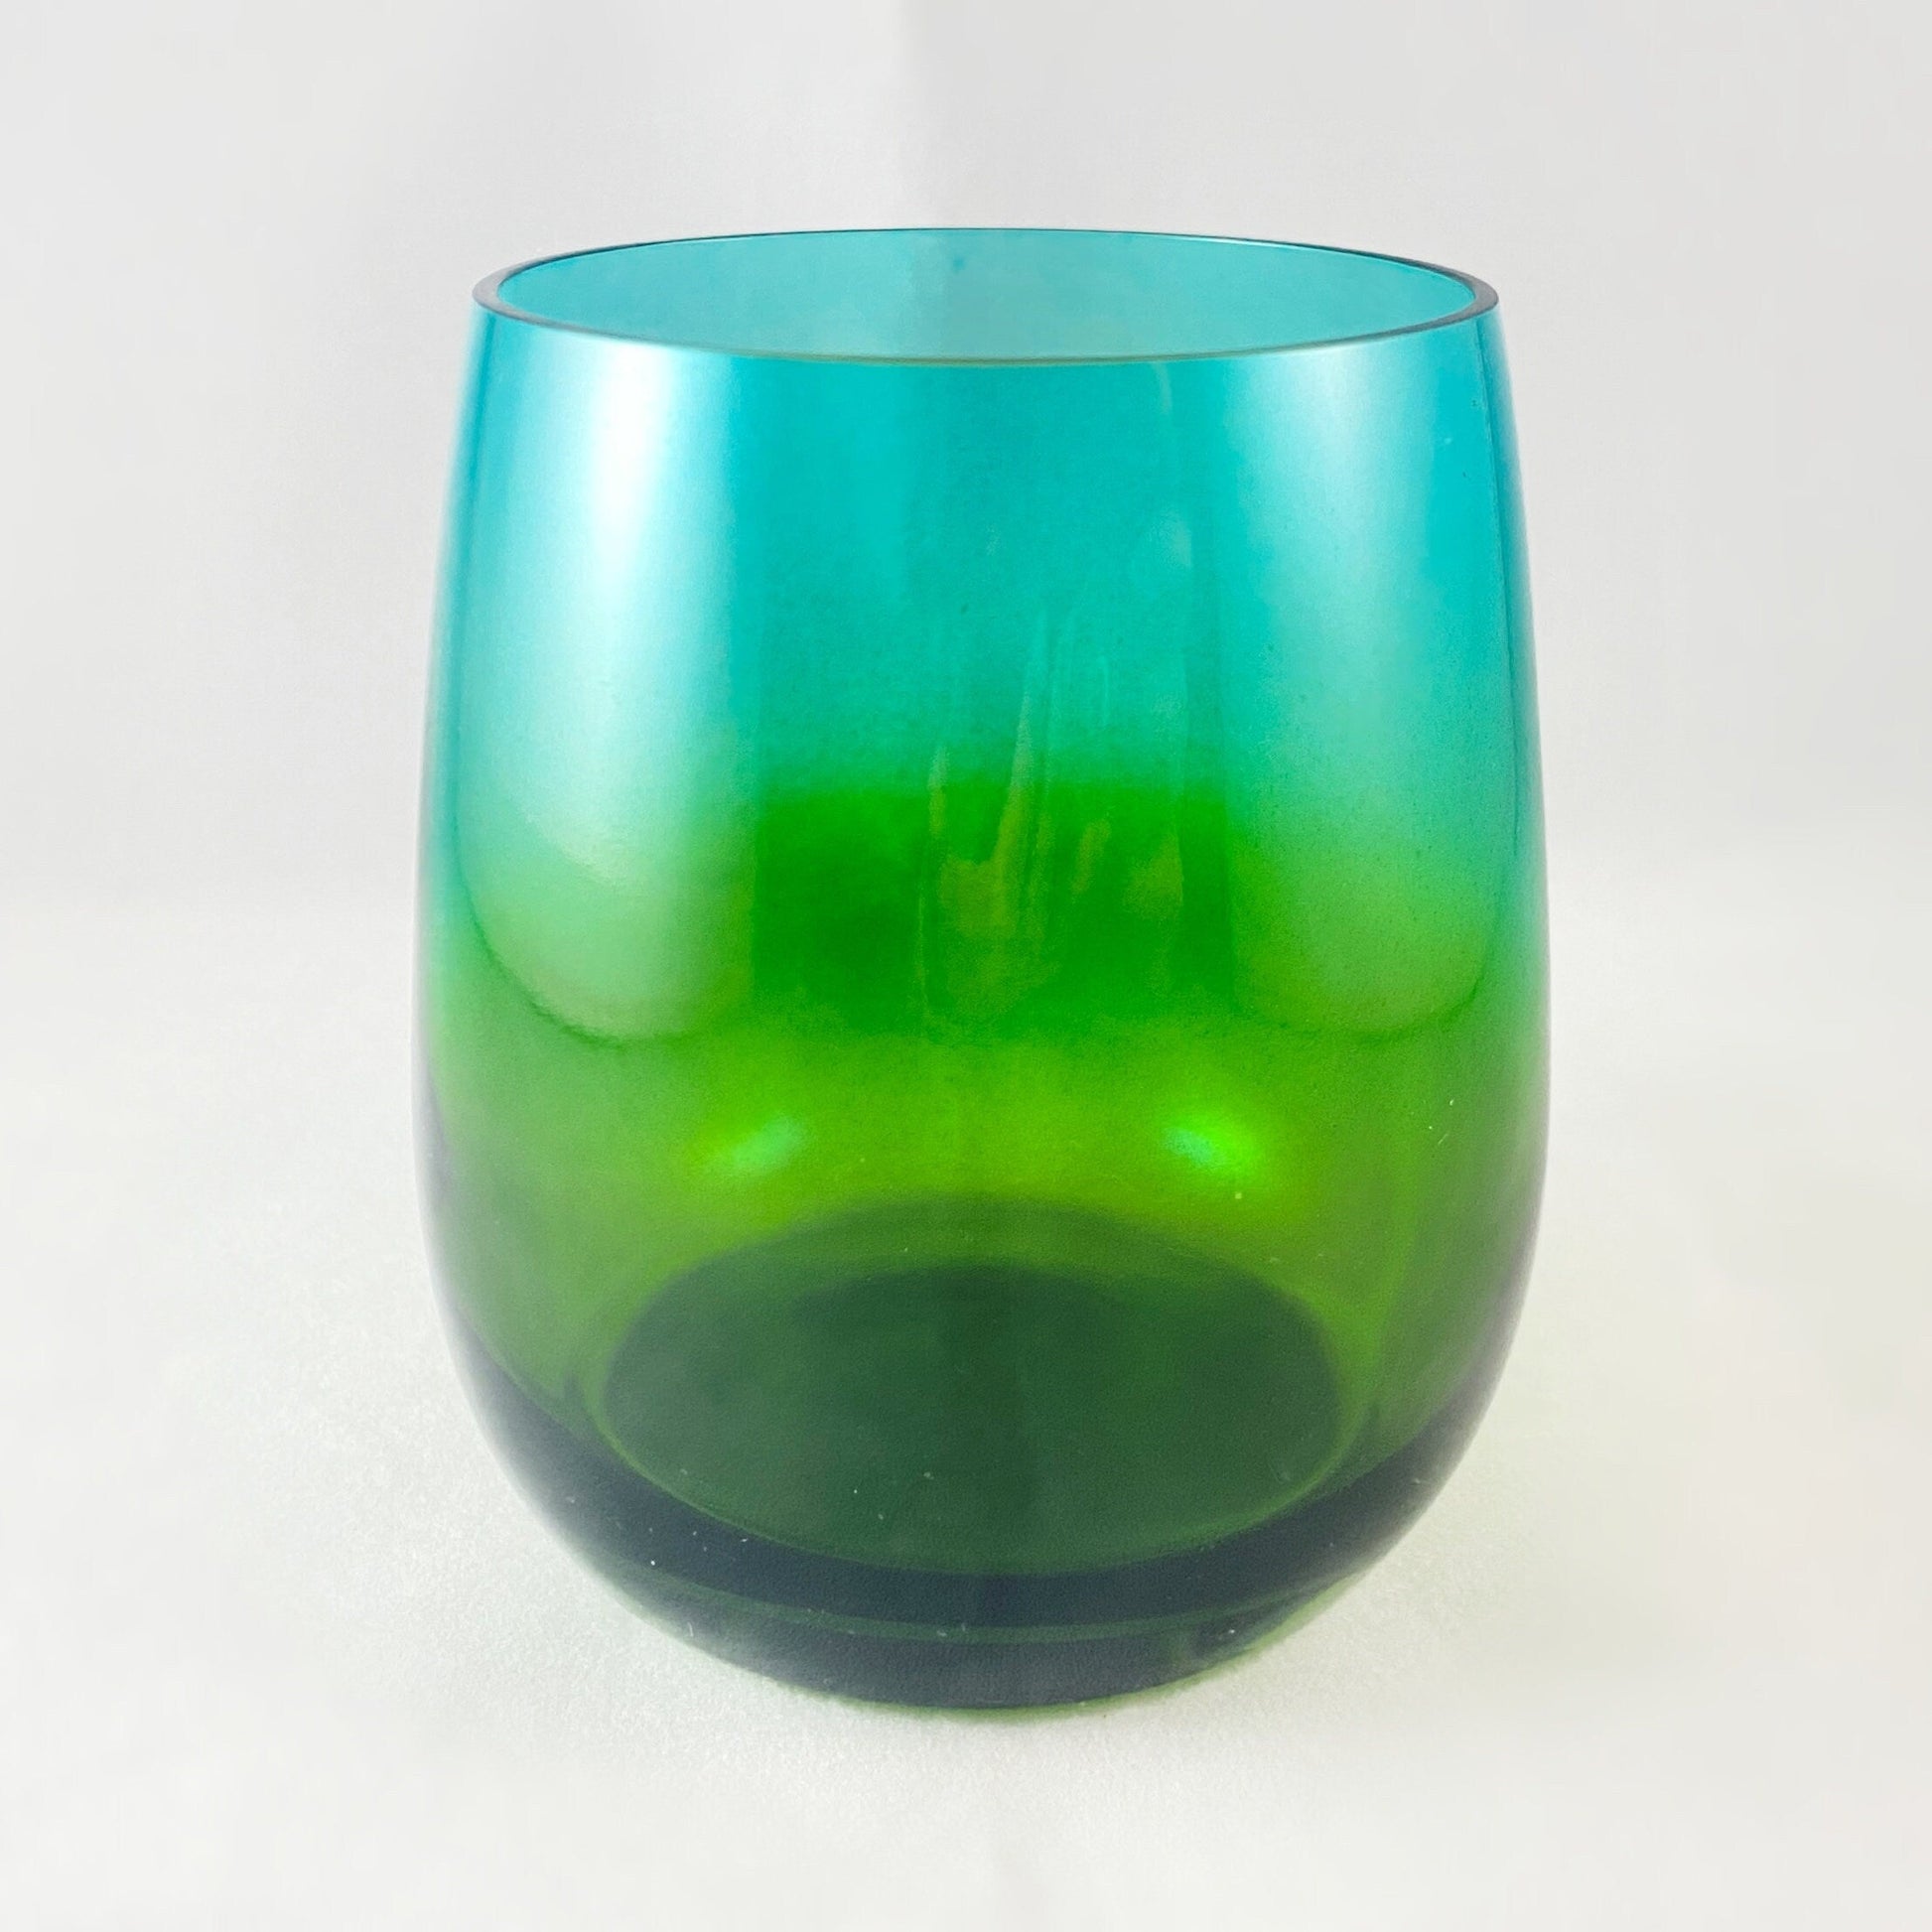 Blue/Green Ombre Gradient Stemless Venetian Wine Glass - Handmade in Italy, Colorful Murano Glass